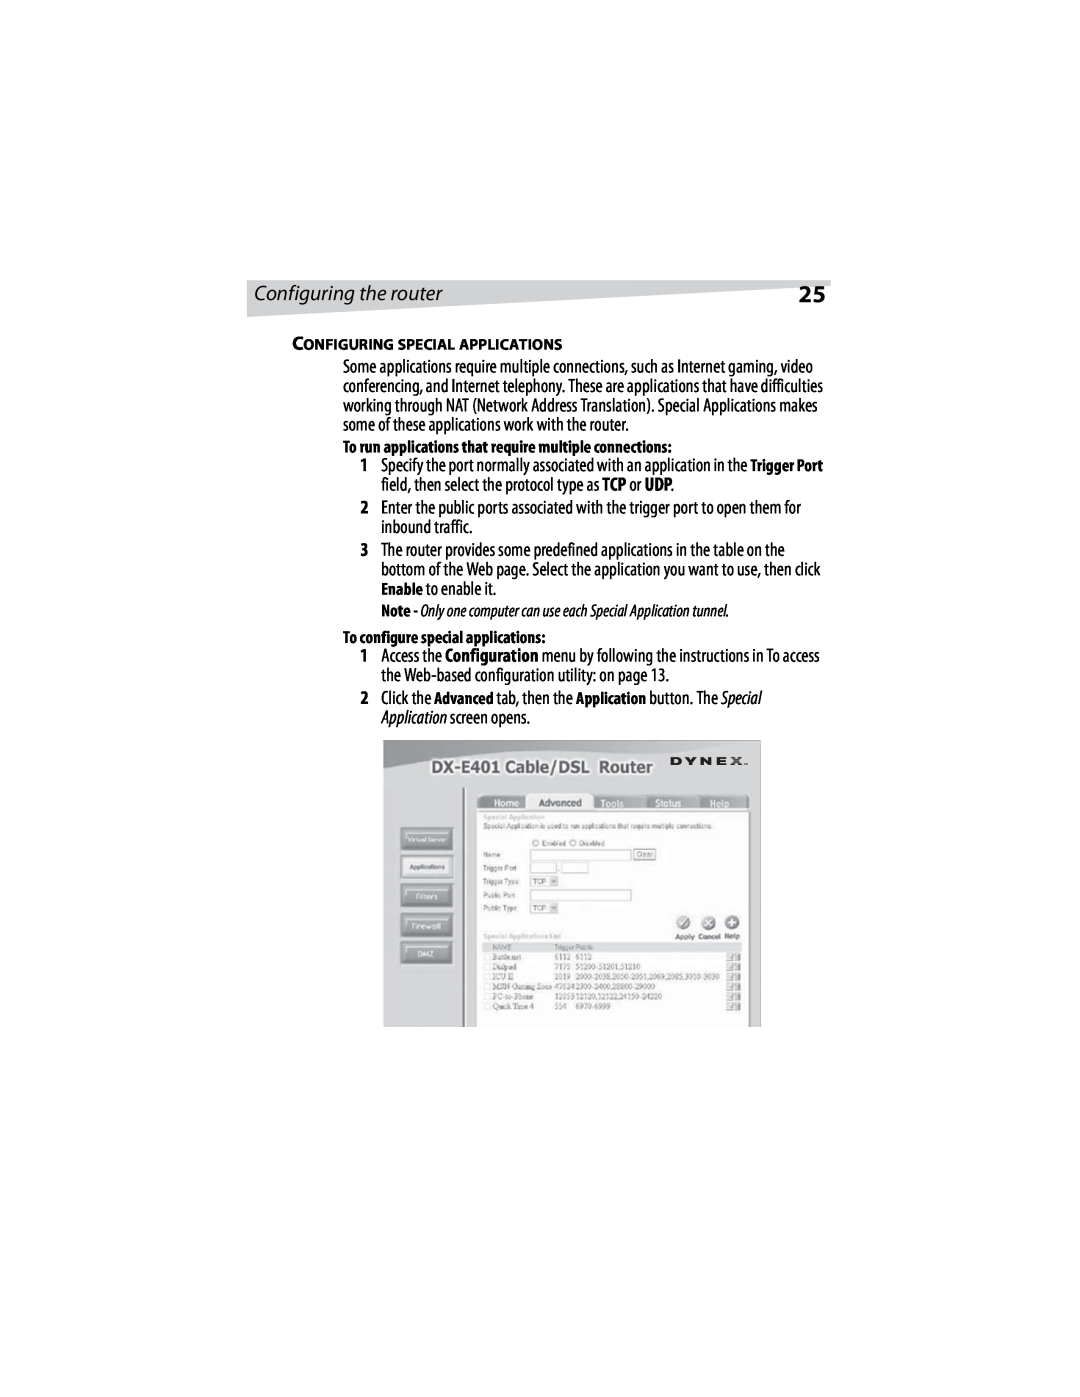 Dynex DX-E401 manual To run applications that require multiple connections, To configure special applications 